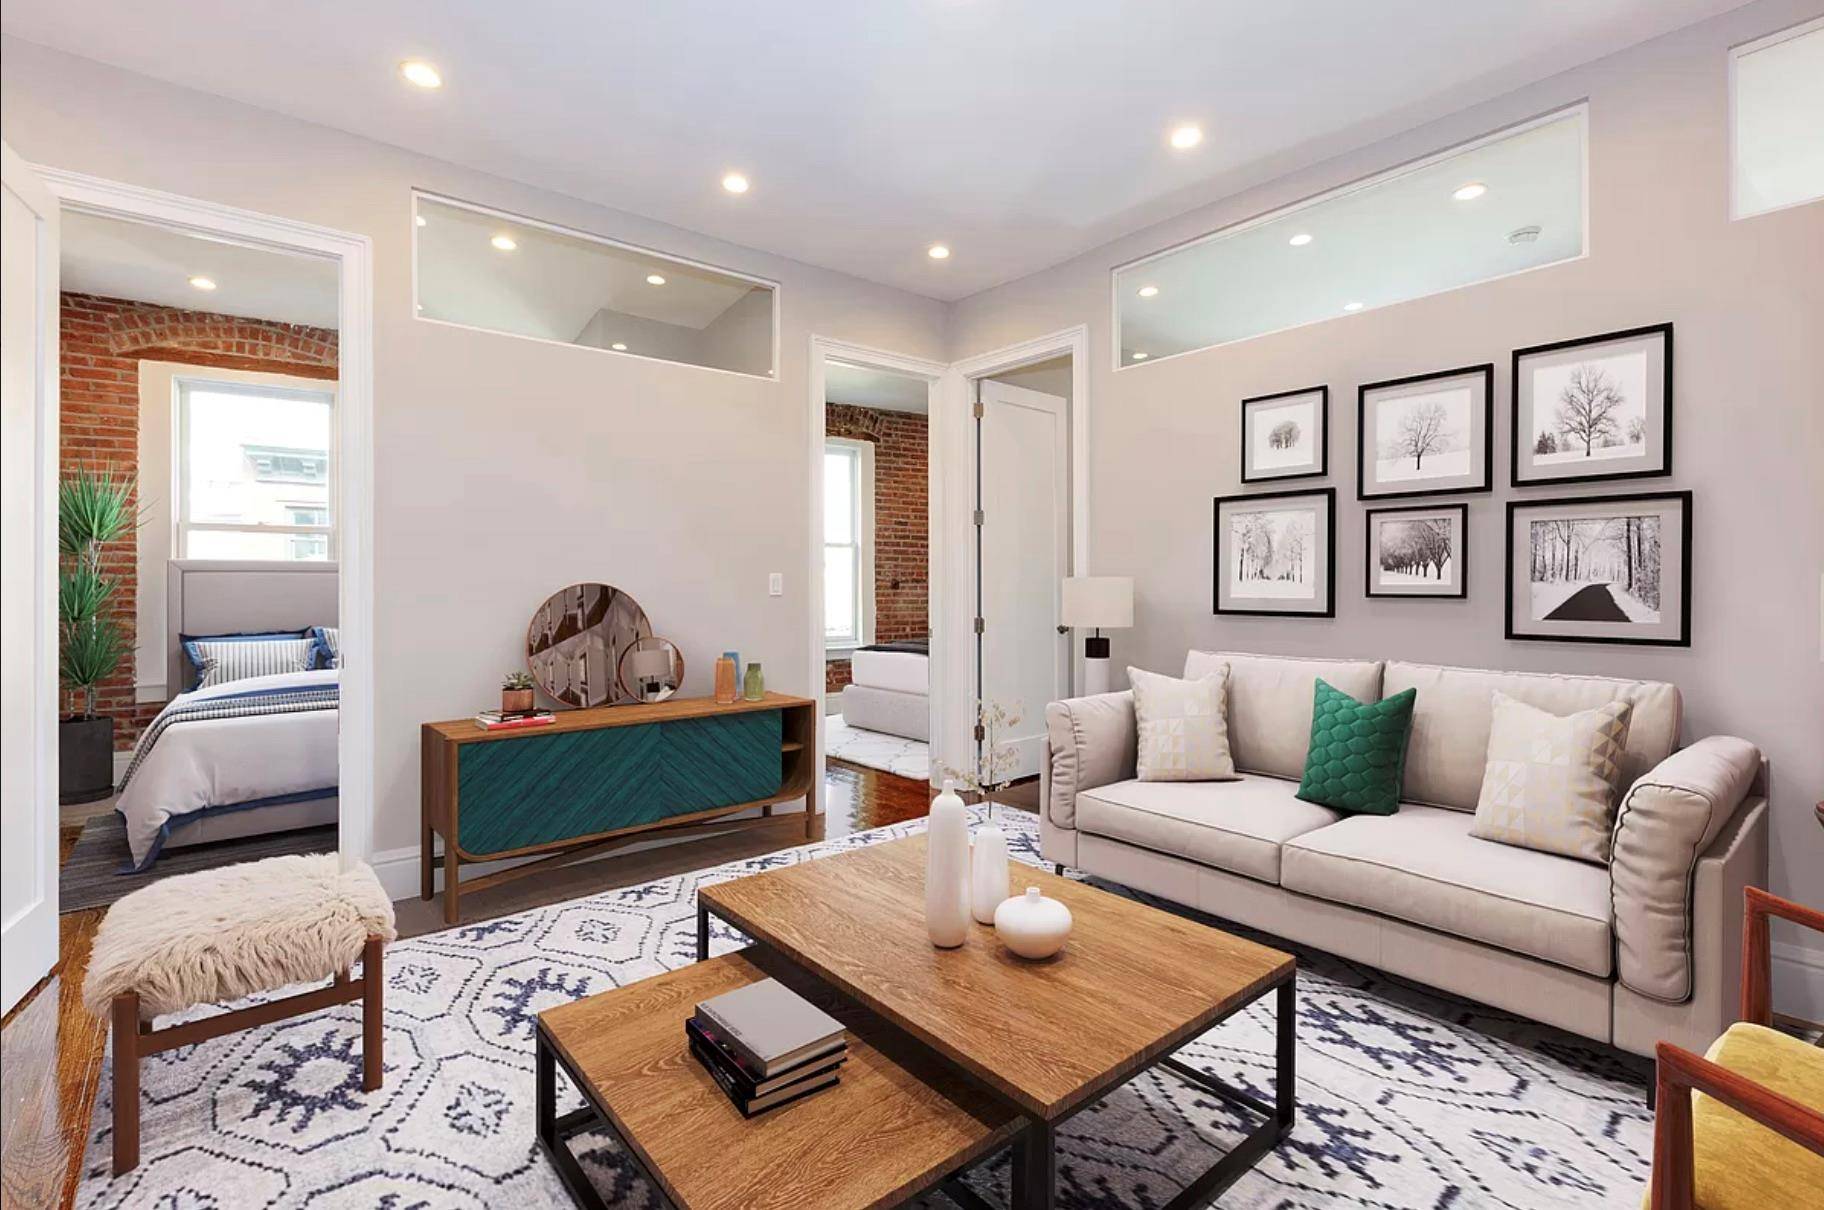 AVAILABLE JULY 1STOPEN HOUSE IS BY APPOINTMENTLAUNDRY IN BUILDINGTRUE 5 BED 2 FULL BATH APTThis immaculate 5 bedroom 2 bathroom apartment is located in the heart of the West Village ...